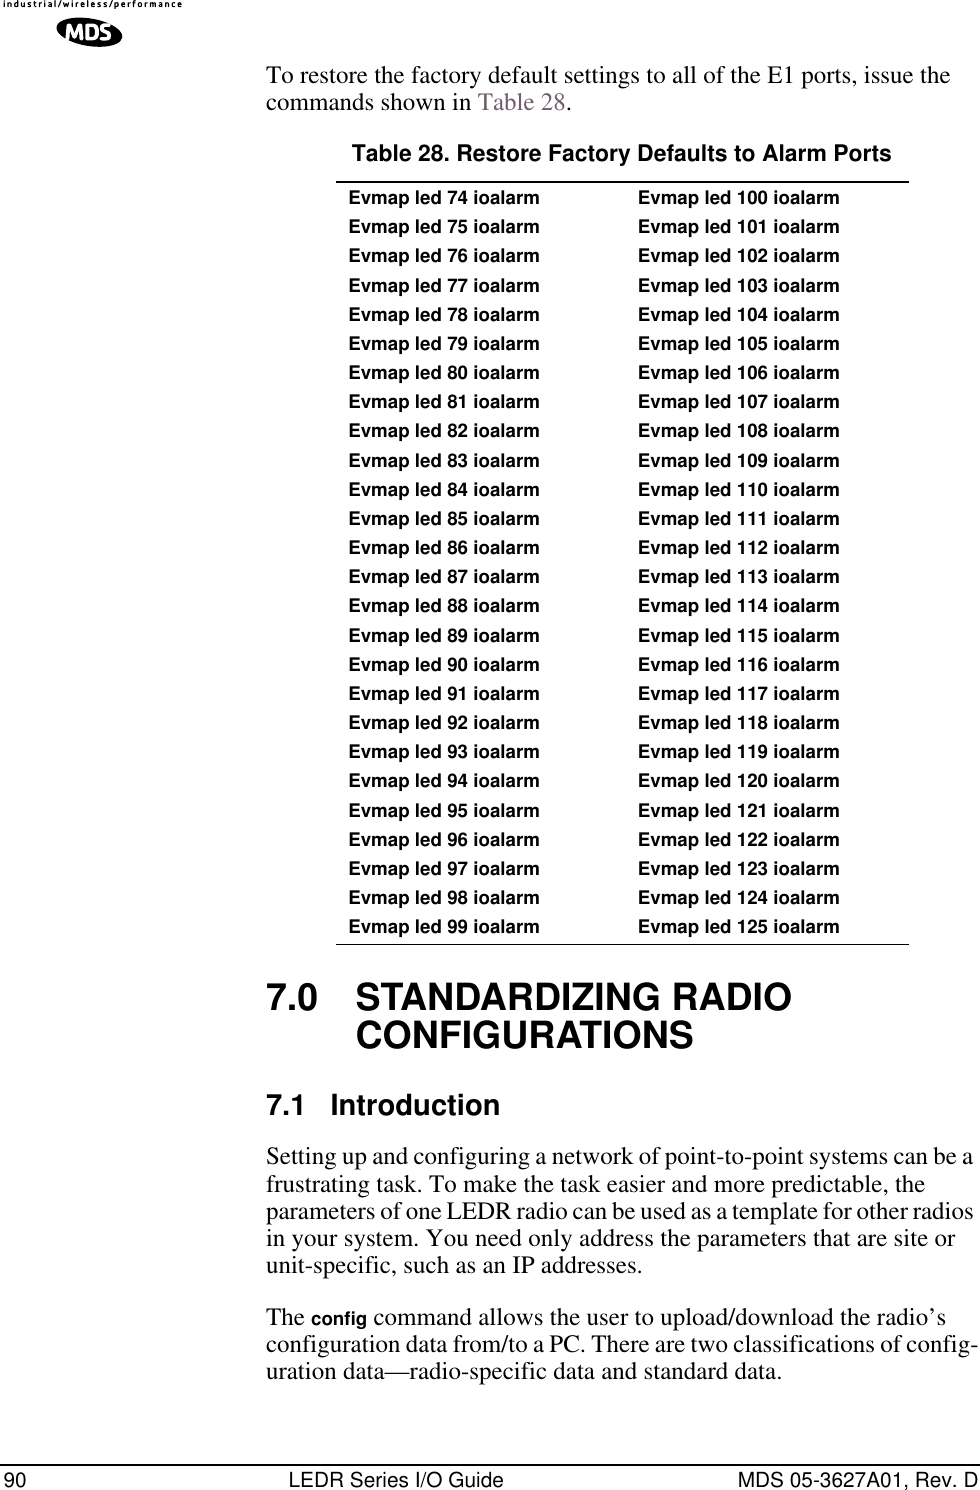 90 LEDR Series I/O Guide MDS 05-3627A01, Rev. DTo restore the factory default settings to all of the E1 ports, issue the commands shown in Table 28.7.0 STANDARDIZING RADIO CONFIGURATIONS7.1 IntroductionSetting up and configuring a network of point-to-point systems can be a frustrating task. To make the task easier and more predictable, the parameters of one LEDR radio can be used as a template for other radios in your system. You need only address the parameters that are site or unit-specific, such as an IP addresses.The conﬁg command allows the user to upload/download the radio’s configuration data from/to a PC. There are two classifications of config-uration data—radio-specific data and standard data. Table 28. Restore Factory Defaults to Alarm Ports   Evmap led 74 ioalarmEvmap led 75 ioalarmEvmap led 76 ioalarmEvmap led 77 ioalarmEvmap led 78 ioalarmEvmap led 79 ioalarmEvmap led 80 ioalarmEvmap led 81 ioalarmEvmap led 82 ioalarmEvmap led 83 ioalarmEvmap led 84 ioalarmEvmap led 85 ioalarmEvmap led 86 ioalarmEvmap led 87 ioalarmEvmap led 88 ioalarmEvmap led 89 ioalarmEvmap led 90 ioalarmEvmap led 91 ioalarmEvmap led 92 ioalarmEvmap led 93 ioalarmEvmap led 94 ioalarmEvmap led 95 ioalarmEvmap led 96 ioalarmEvmap led 97 ioalarmEvmap led 98 ioalarmEvmap led 99 ioalarmEvmap led 100 ioalarmEvmap led 101 ioalarmEvmap led 102 ioalarmEvmap led 103 ioalarmEvmap led 104 ioalarmEvmap led 105 ioalarmEvmap led 106 ioalarmEvmap led 107 ioalarmEvmap led 108 ioalarmEvmap led 109 ioalarmEvmap led 110 ioalarmEvmap led 111 ioalarmEvmap led 112 ioalarmEvmap led 113 ioalarmEvmap led 114 ioalarmEvmap led 115 ioalarmEvmap led 116 ioalarmEvmap led 117 ioalarmEvmap led 118 ioalarmEvmap led 119 ioalarmEvmap led 120 ioalarmEvmap led 121 ioalarmEvmap led 122 ioalarmEvmap led 123 ioalarmEvmap led 124 ioalarmEvmap led 125 ioalarm